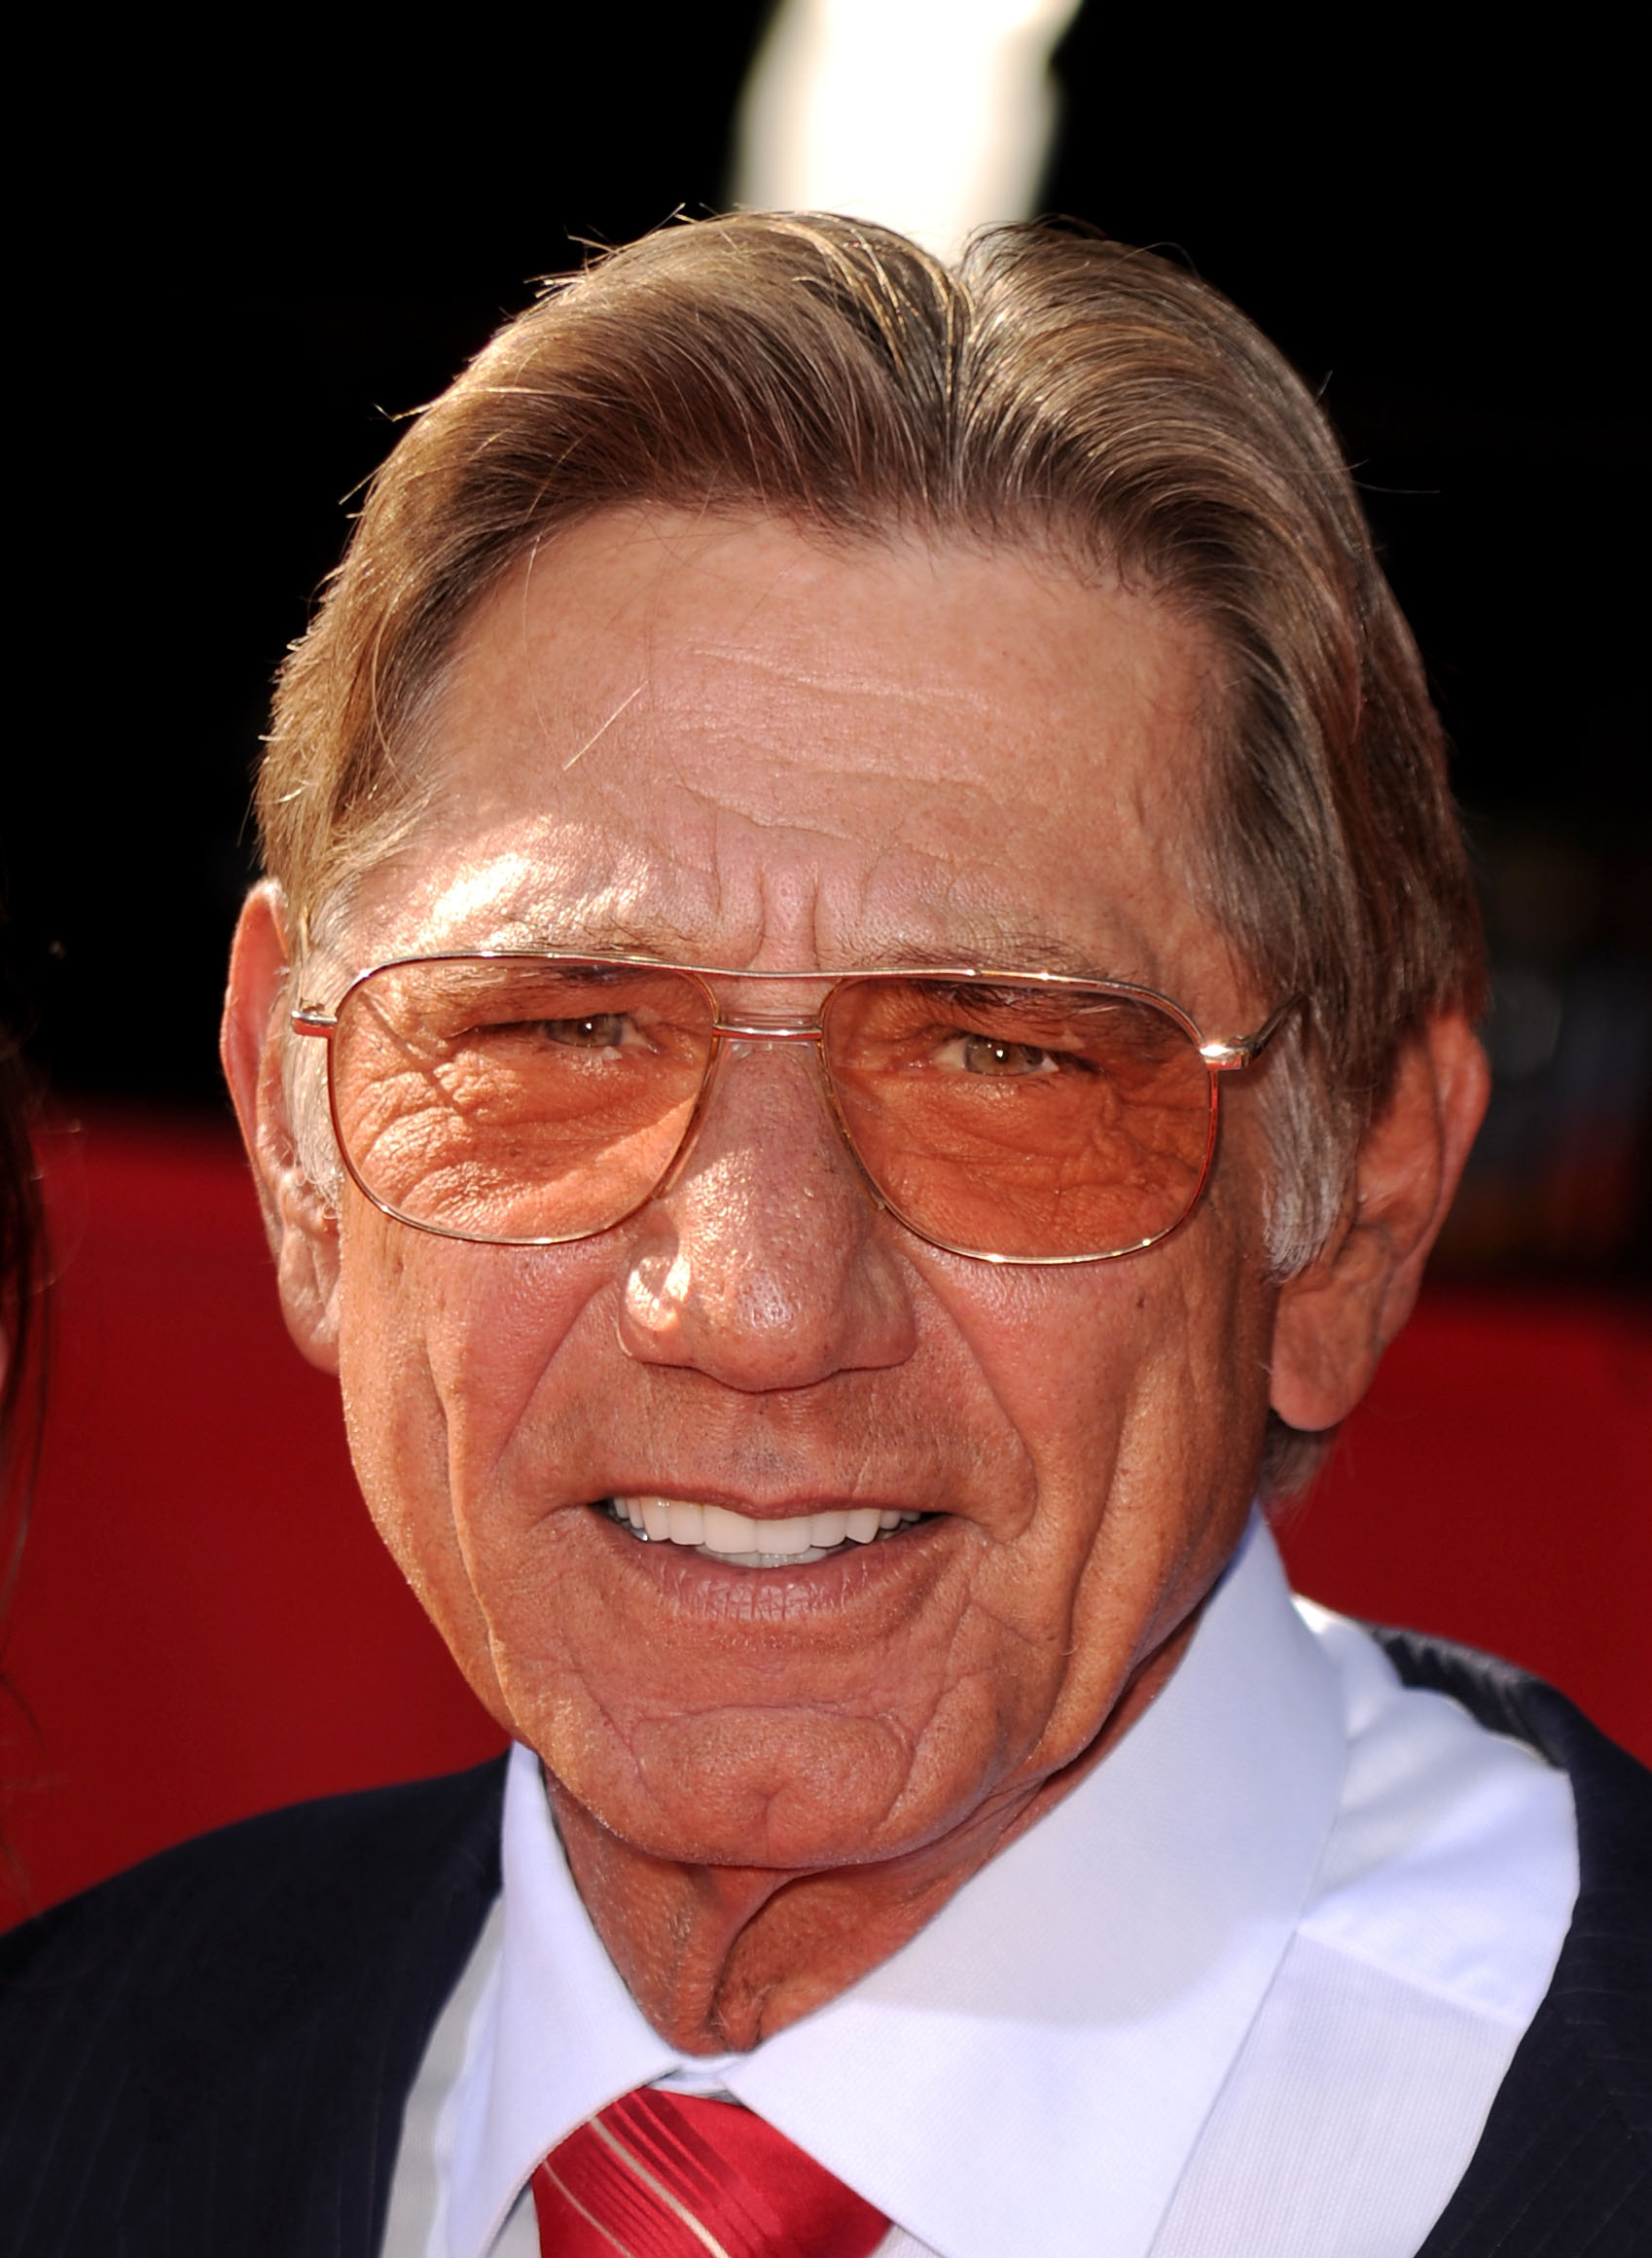 LOS ANGELES, CA - JULY 14:  Former NFL quarterback Joe Namath arrives at the 2010 ESPY Awards at Nokia Theatre L.A. Live on July 14, 2010 in Los Angeles, California.  (Photo by Jason Merritt/Getty Images for ESPY)